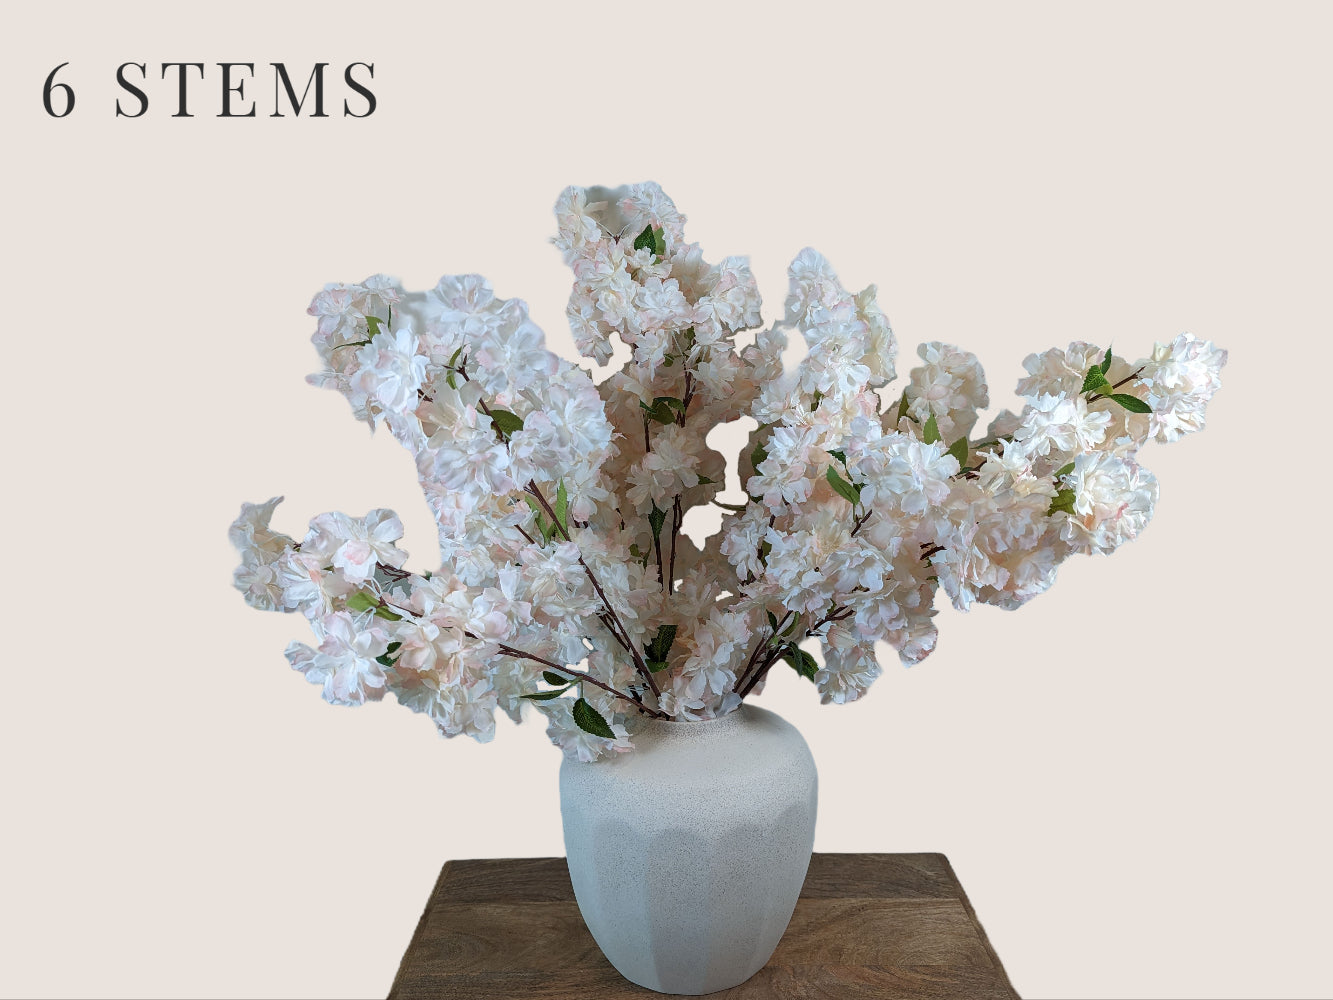 Artificial waterfall cherry blossom stems in soft pink and white, with a brown stem, each stem has 3 branches, with fully, big waterfall blossom blooms. The arrangement includes 6 branches and is displayed in a white vase. The overall height of the arrangement is 38 inches, with 16 inches of stem and 22 inches of branch/flower. The image is set against a neutral beige background.